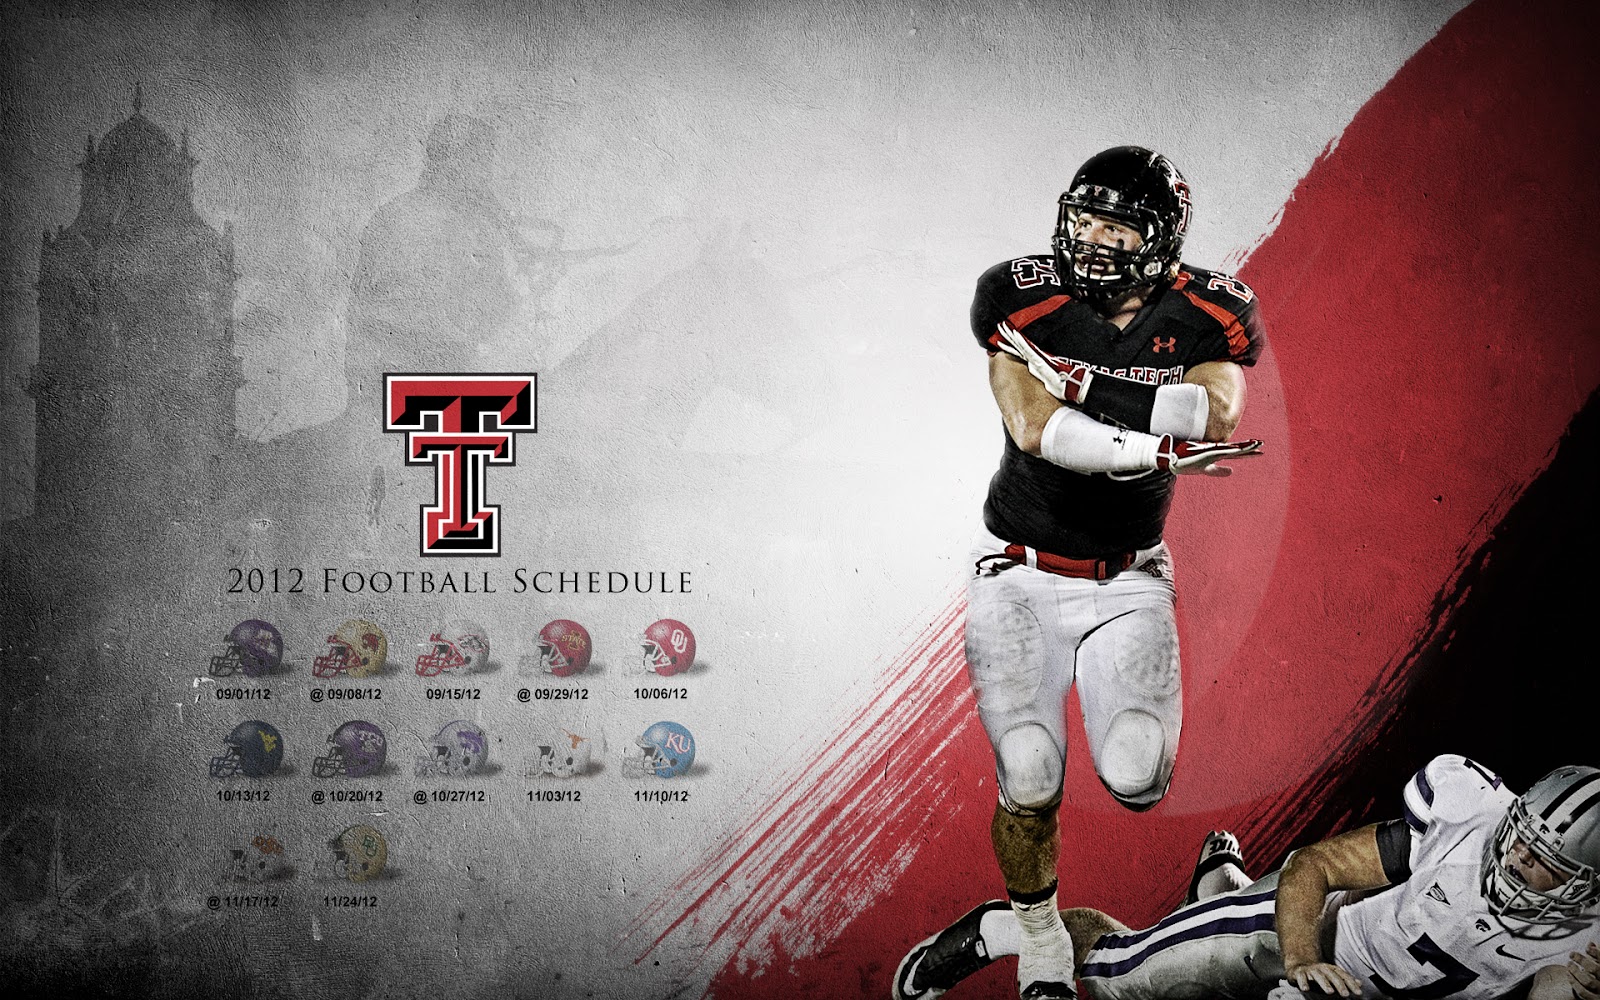 tech football schedule 2015 latest 2013 12 07 2013 12 06 the 2015